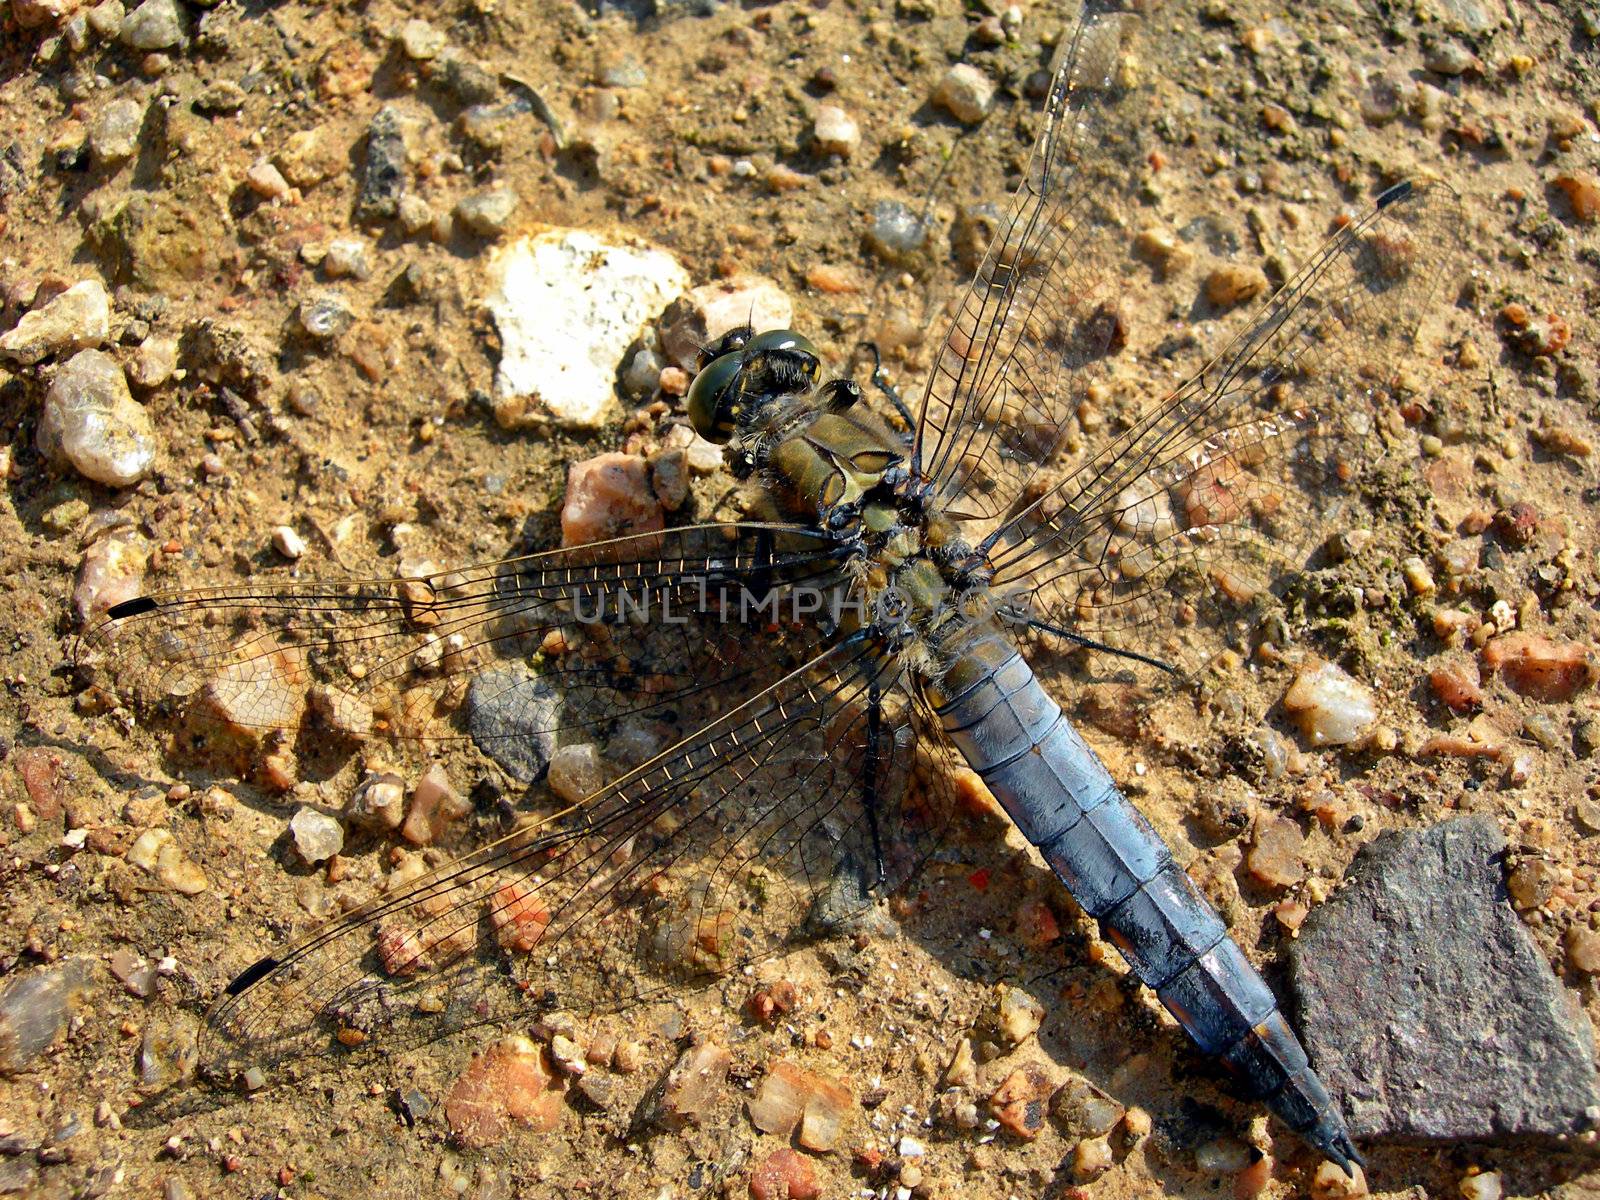              Dragonfly sitting on the sand       